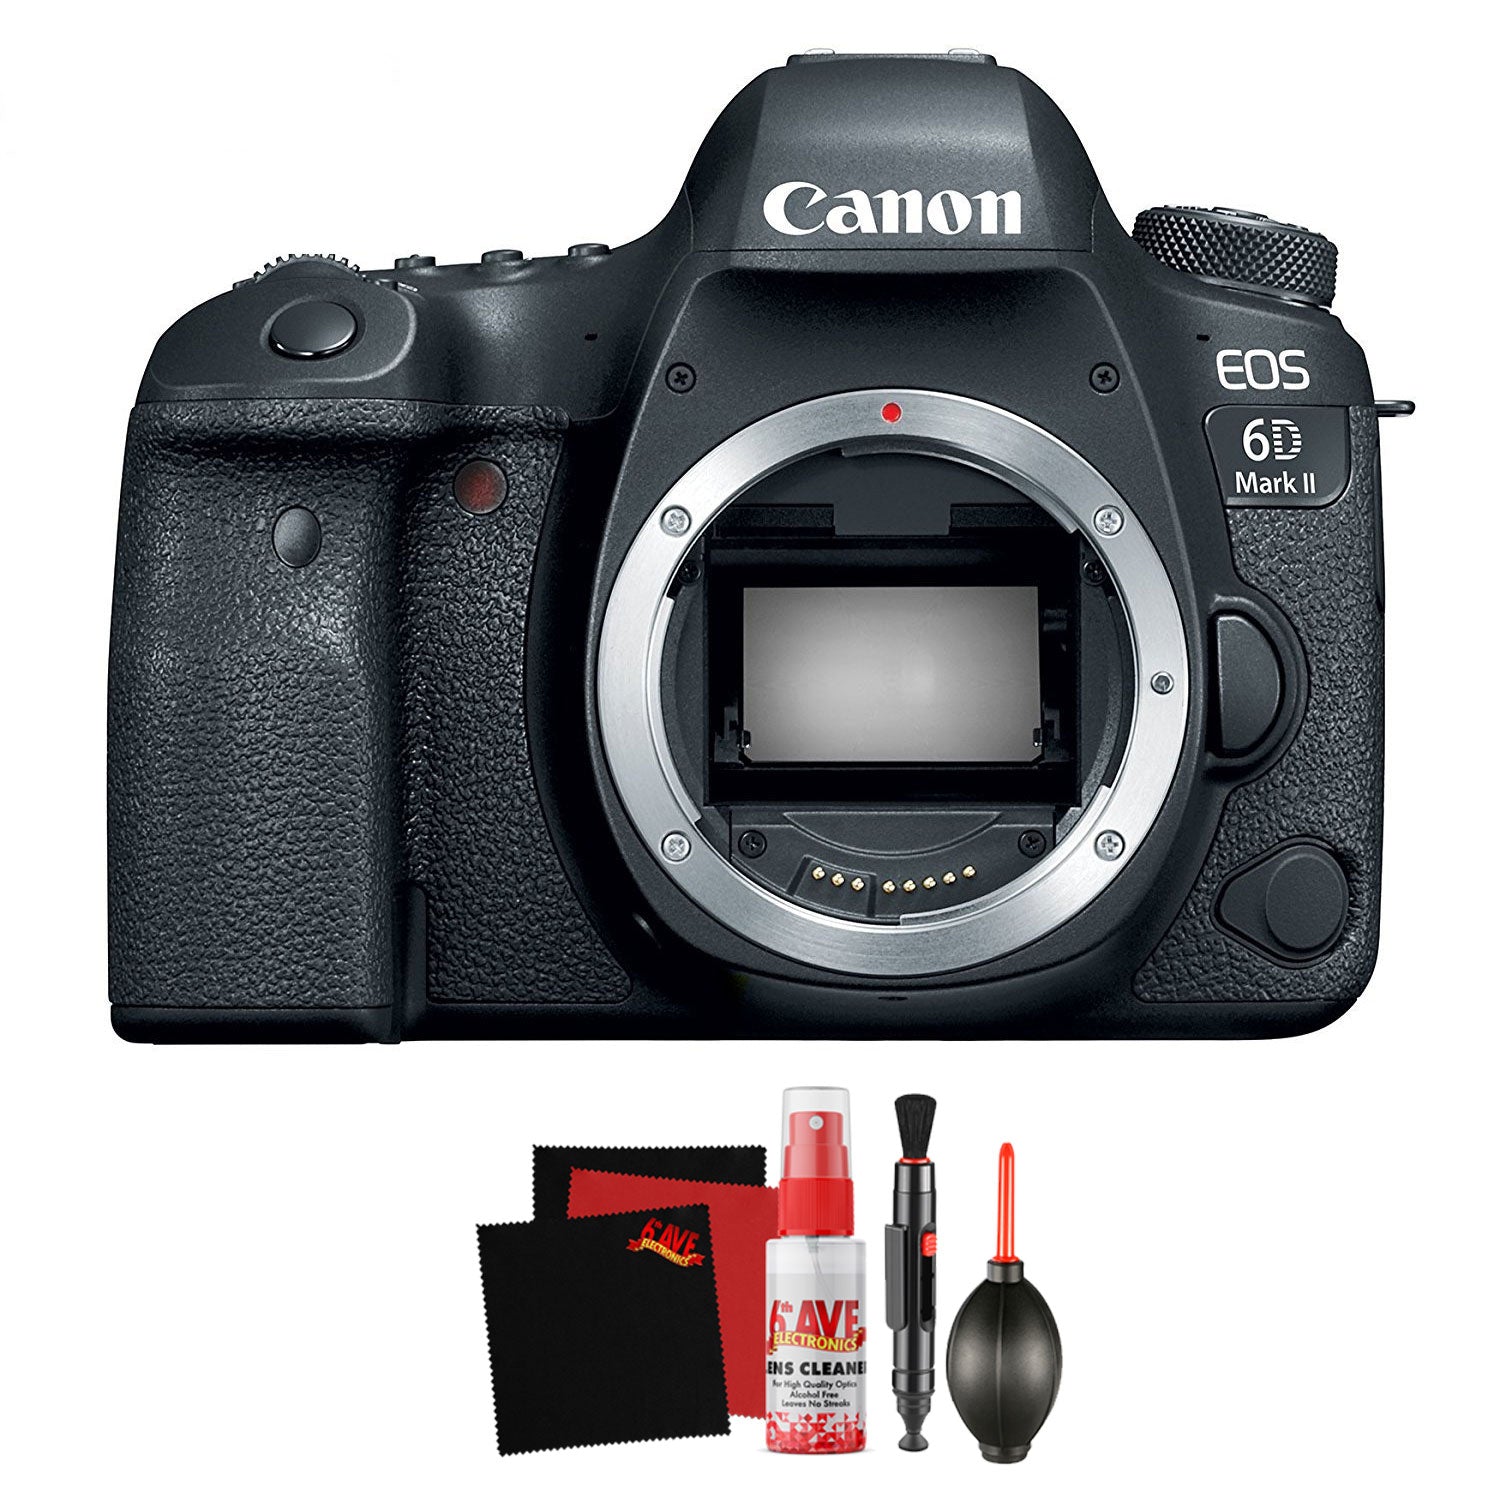 Canon EOS 6D Mark II Digital SLR Camera Body with Cleaning Kit